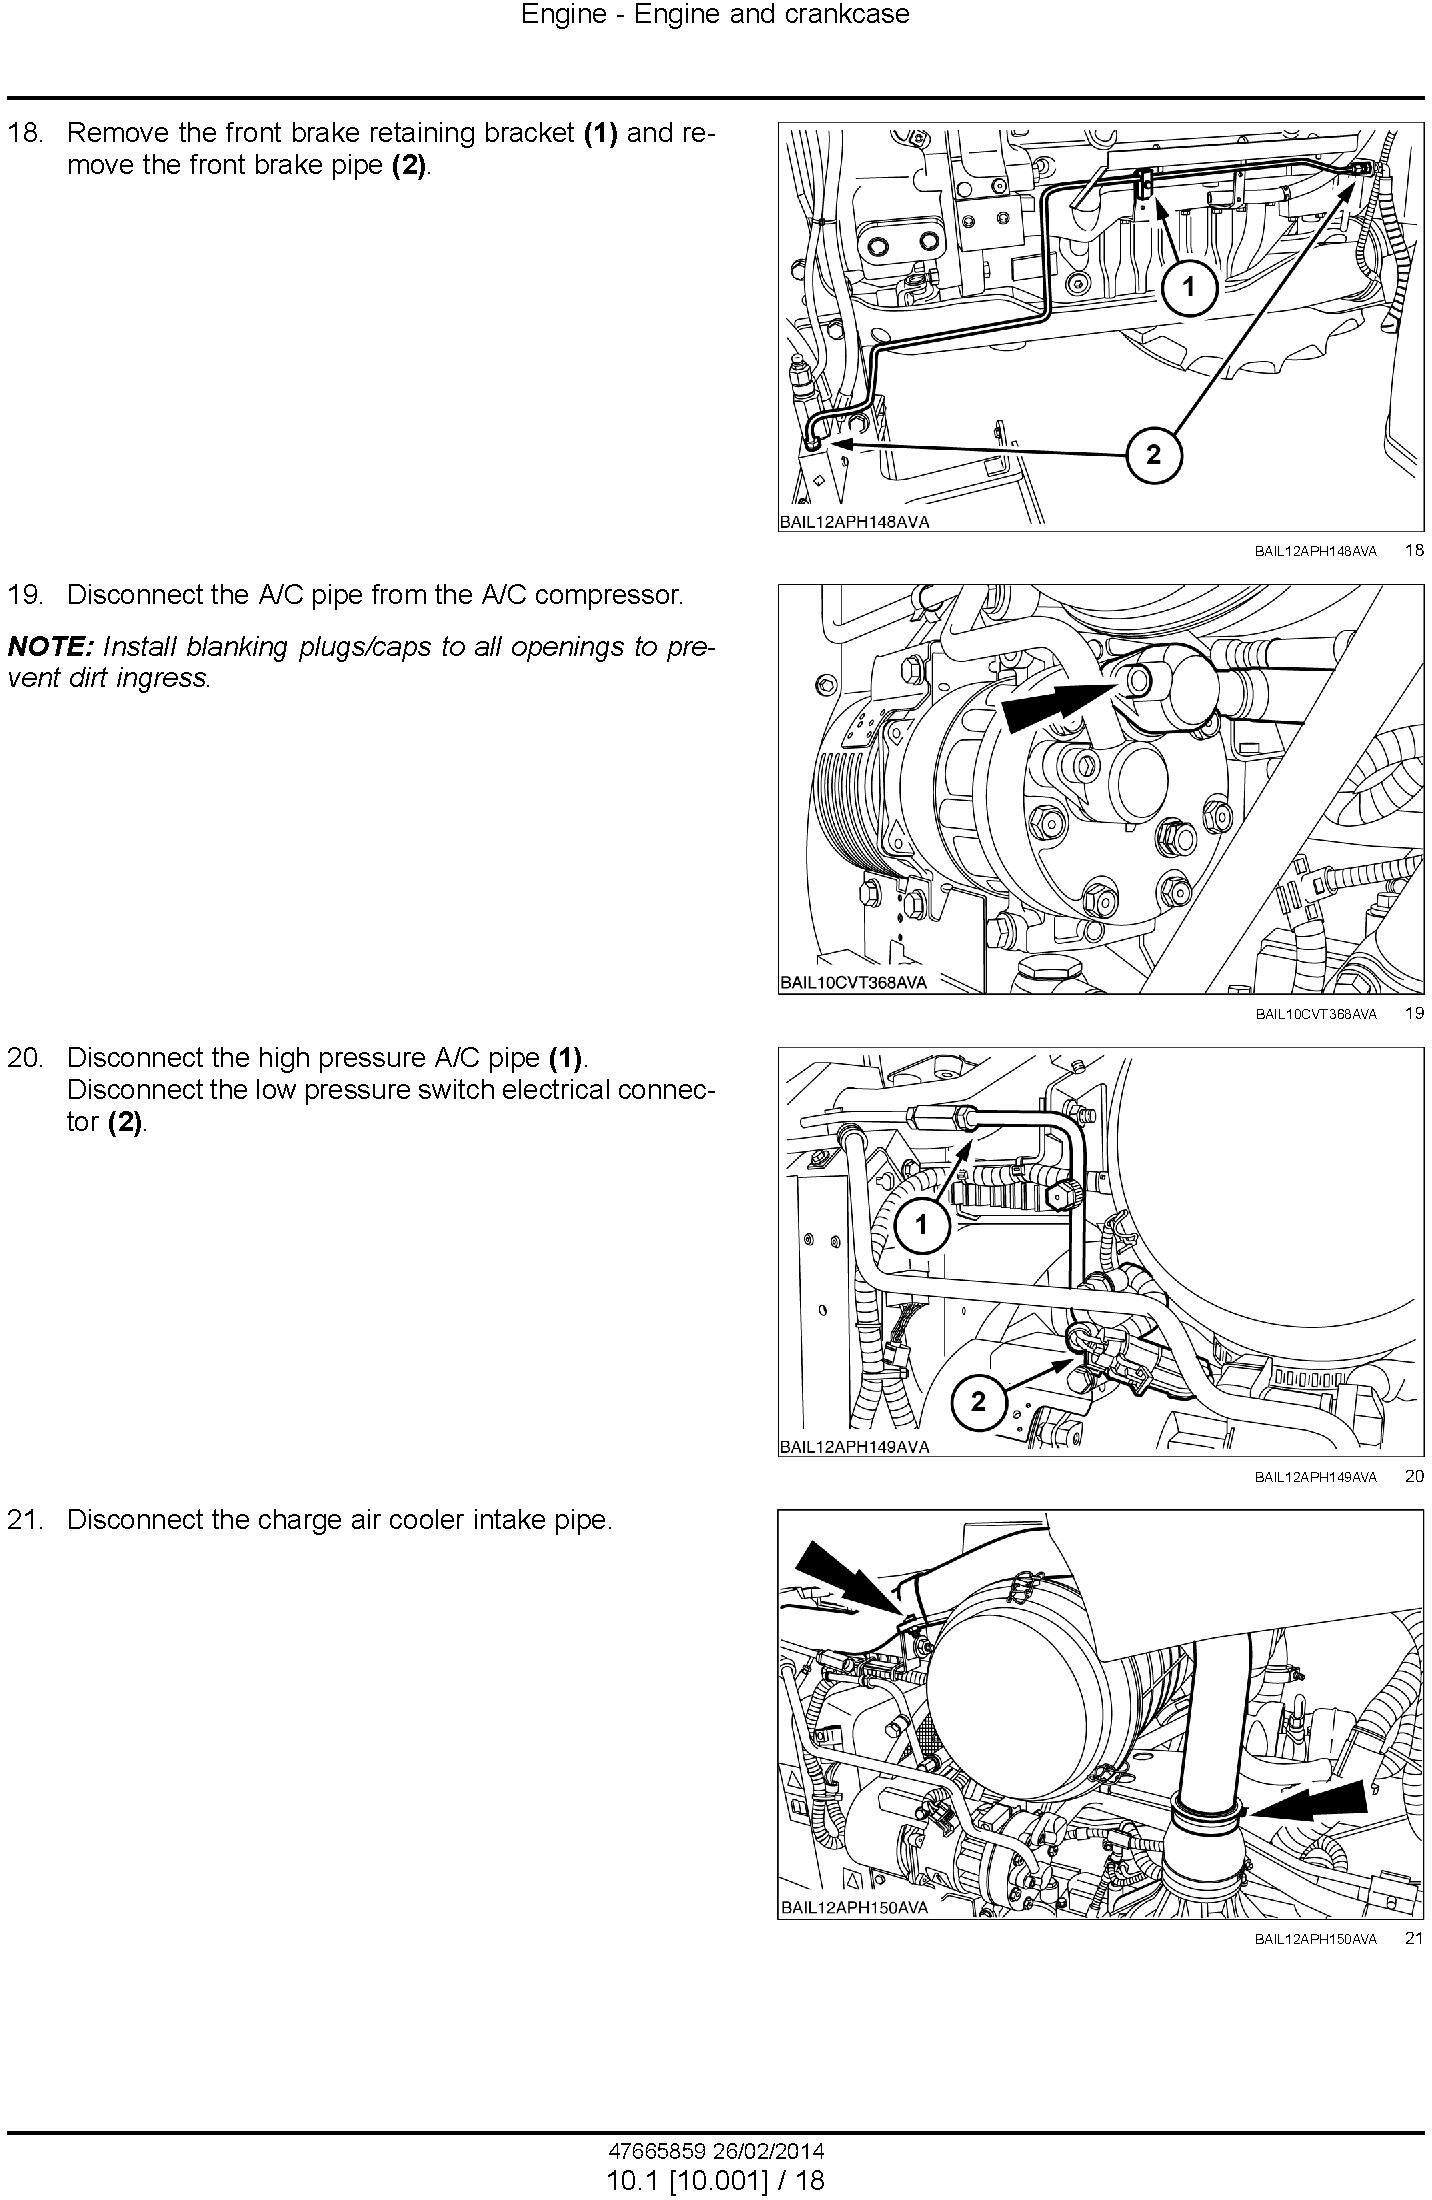 New Holland T6.120, T6.140, T6.150, T6.155, T6.160, T6.165, T6.175 European Tractor Service Manual - 1